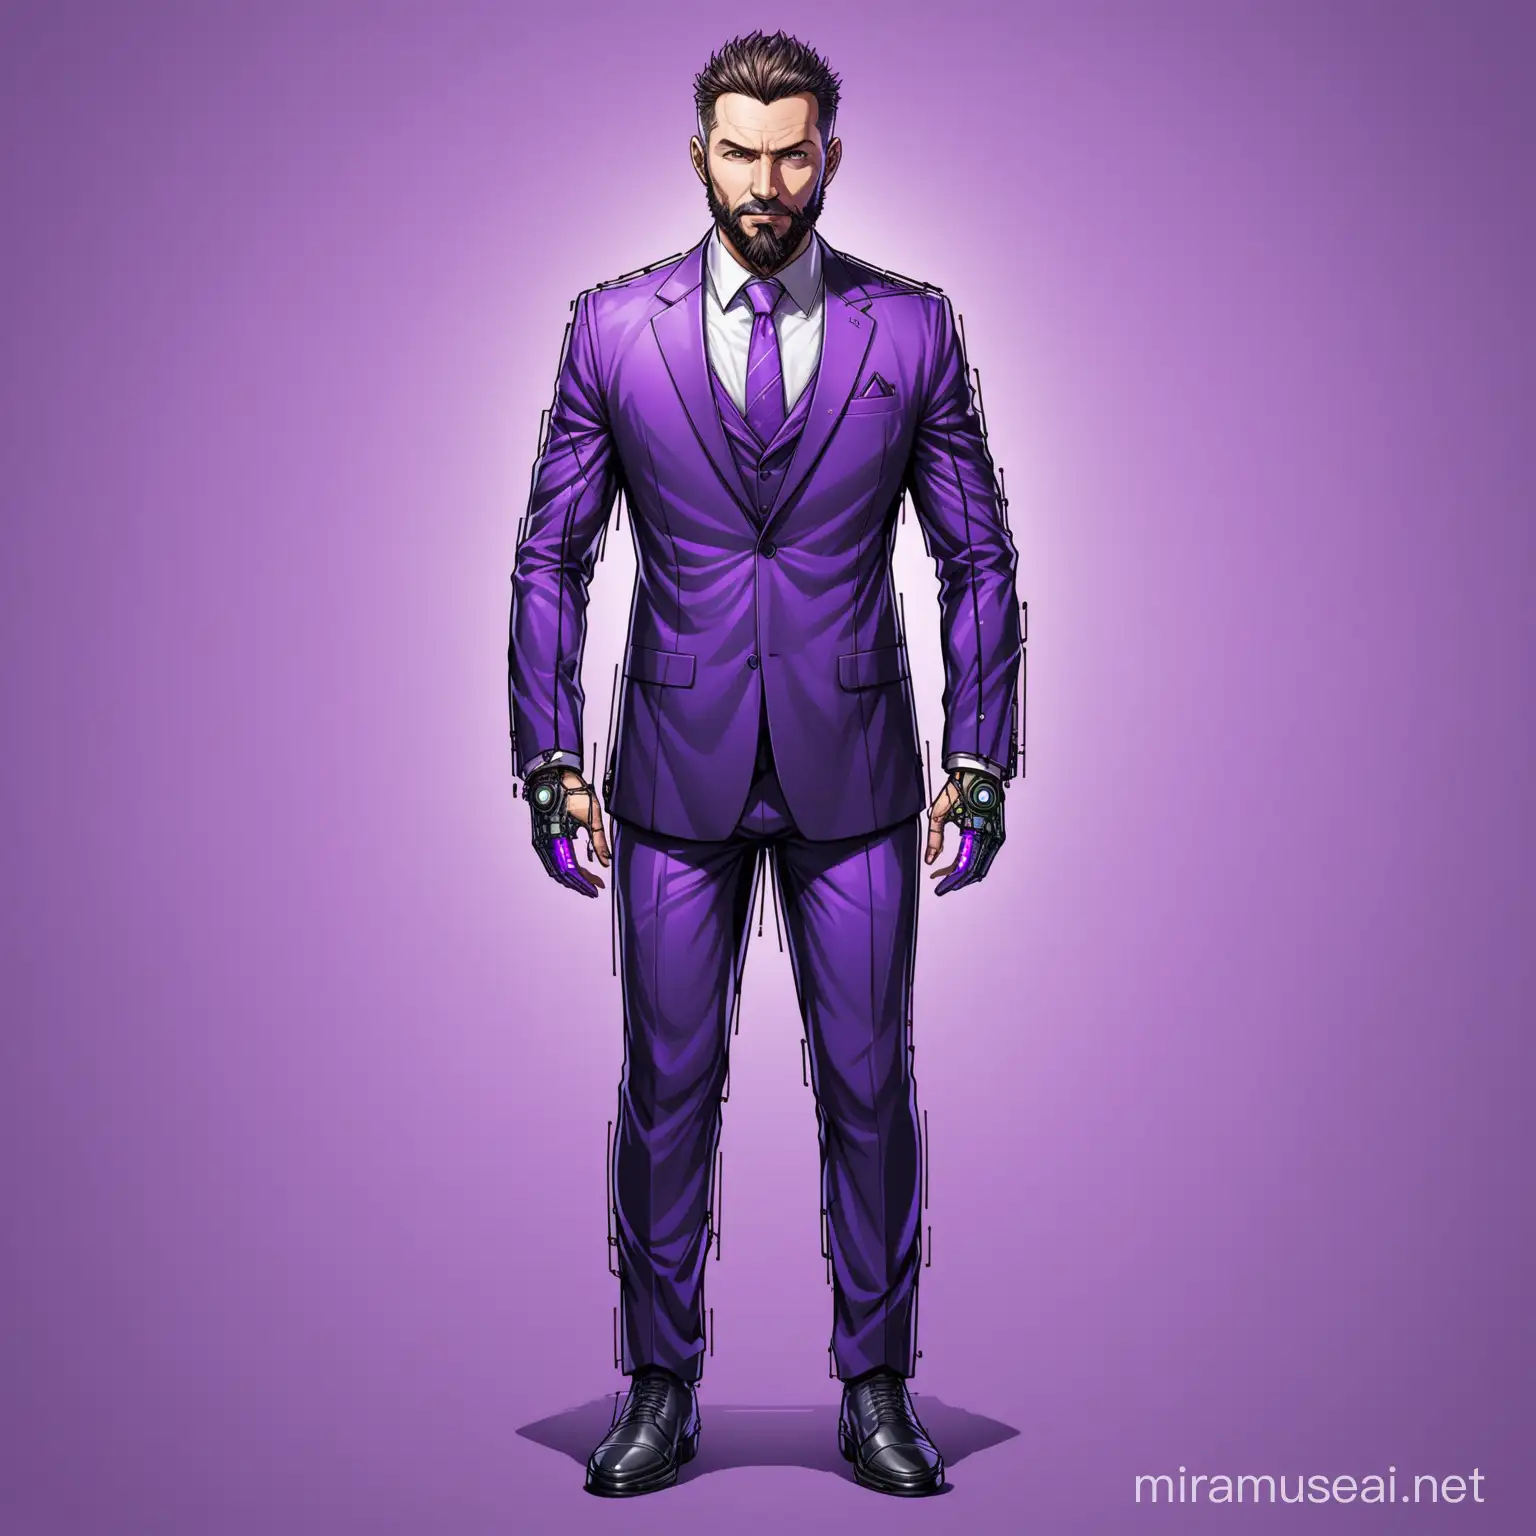 Cyberpunk Corporate Executive Portrait Liev Schreiber Lookalike with Implants and Violet Accents